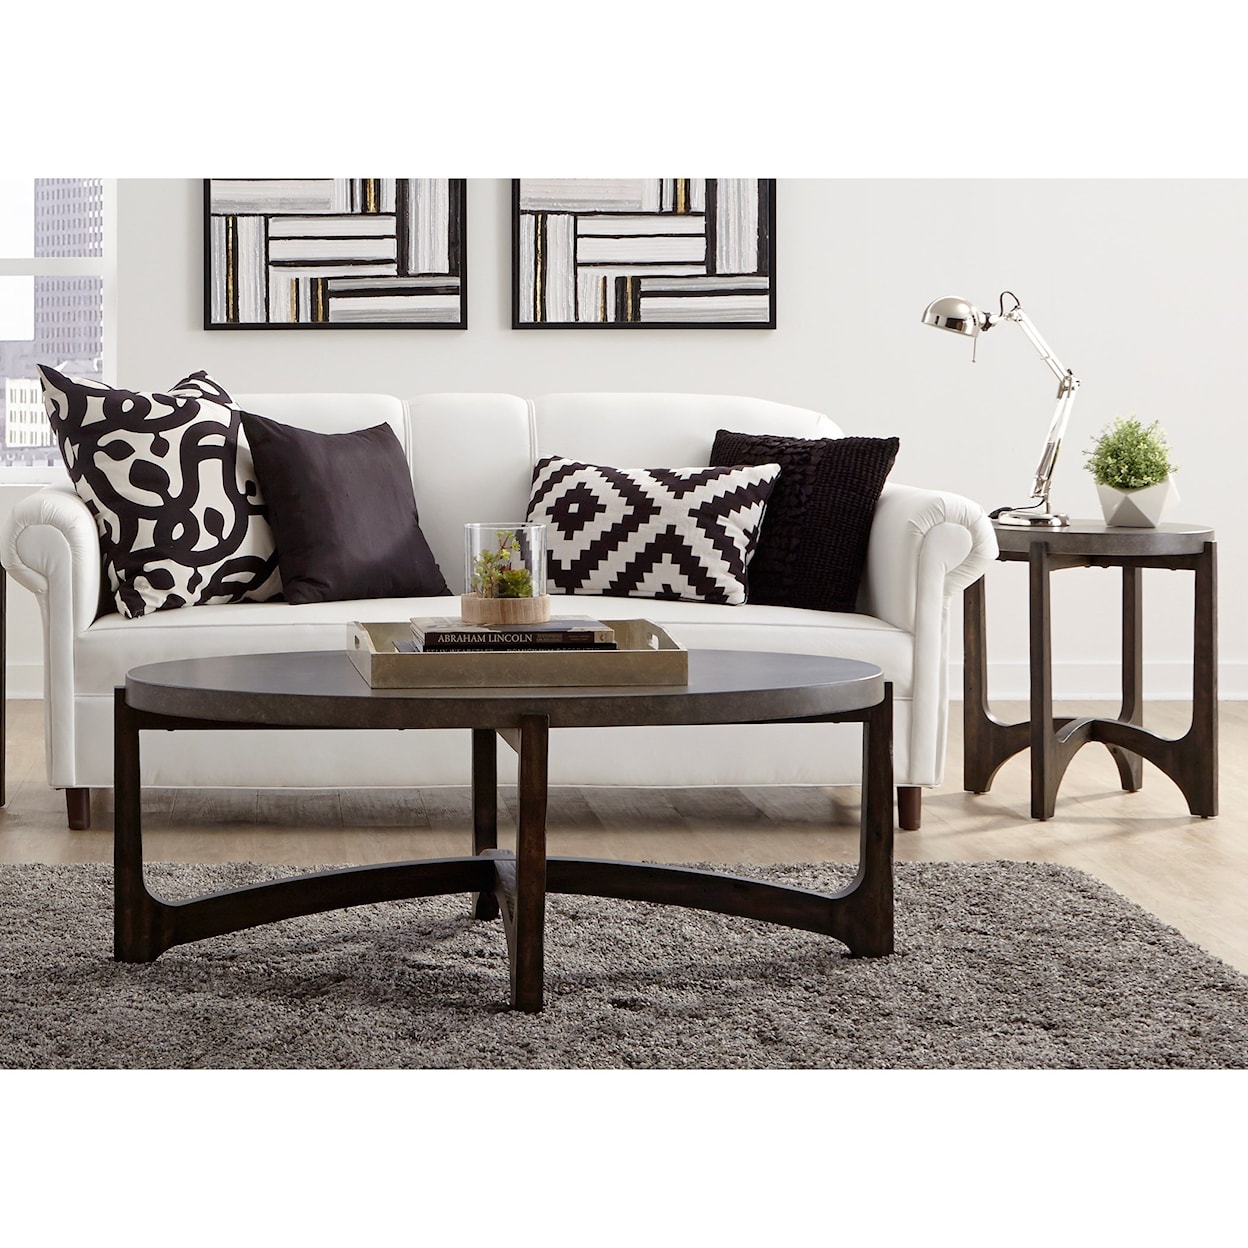 Liberty Furniture Cascade 3 Piece Occasional Table Group